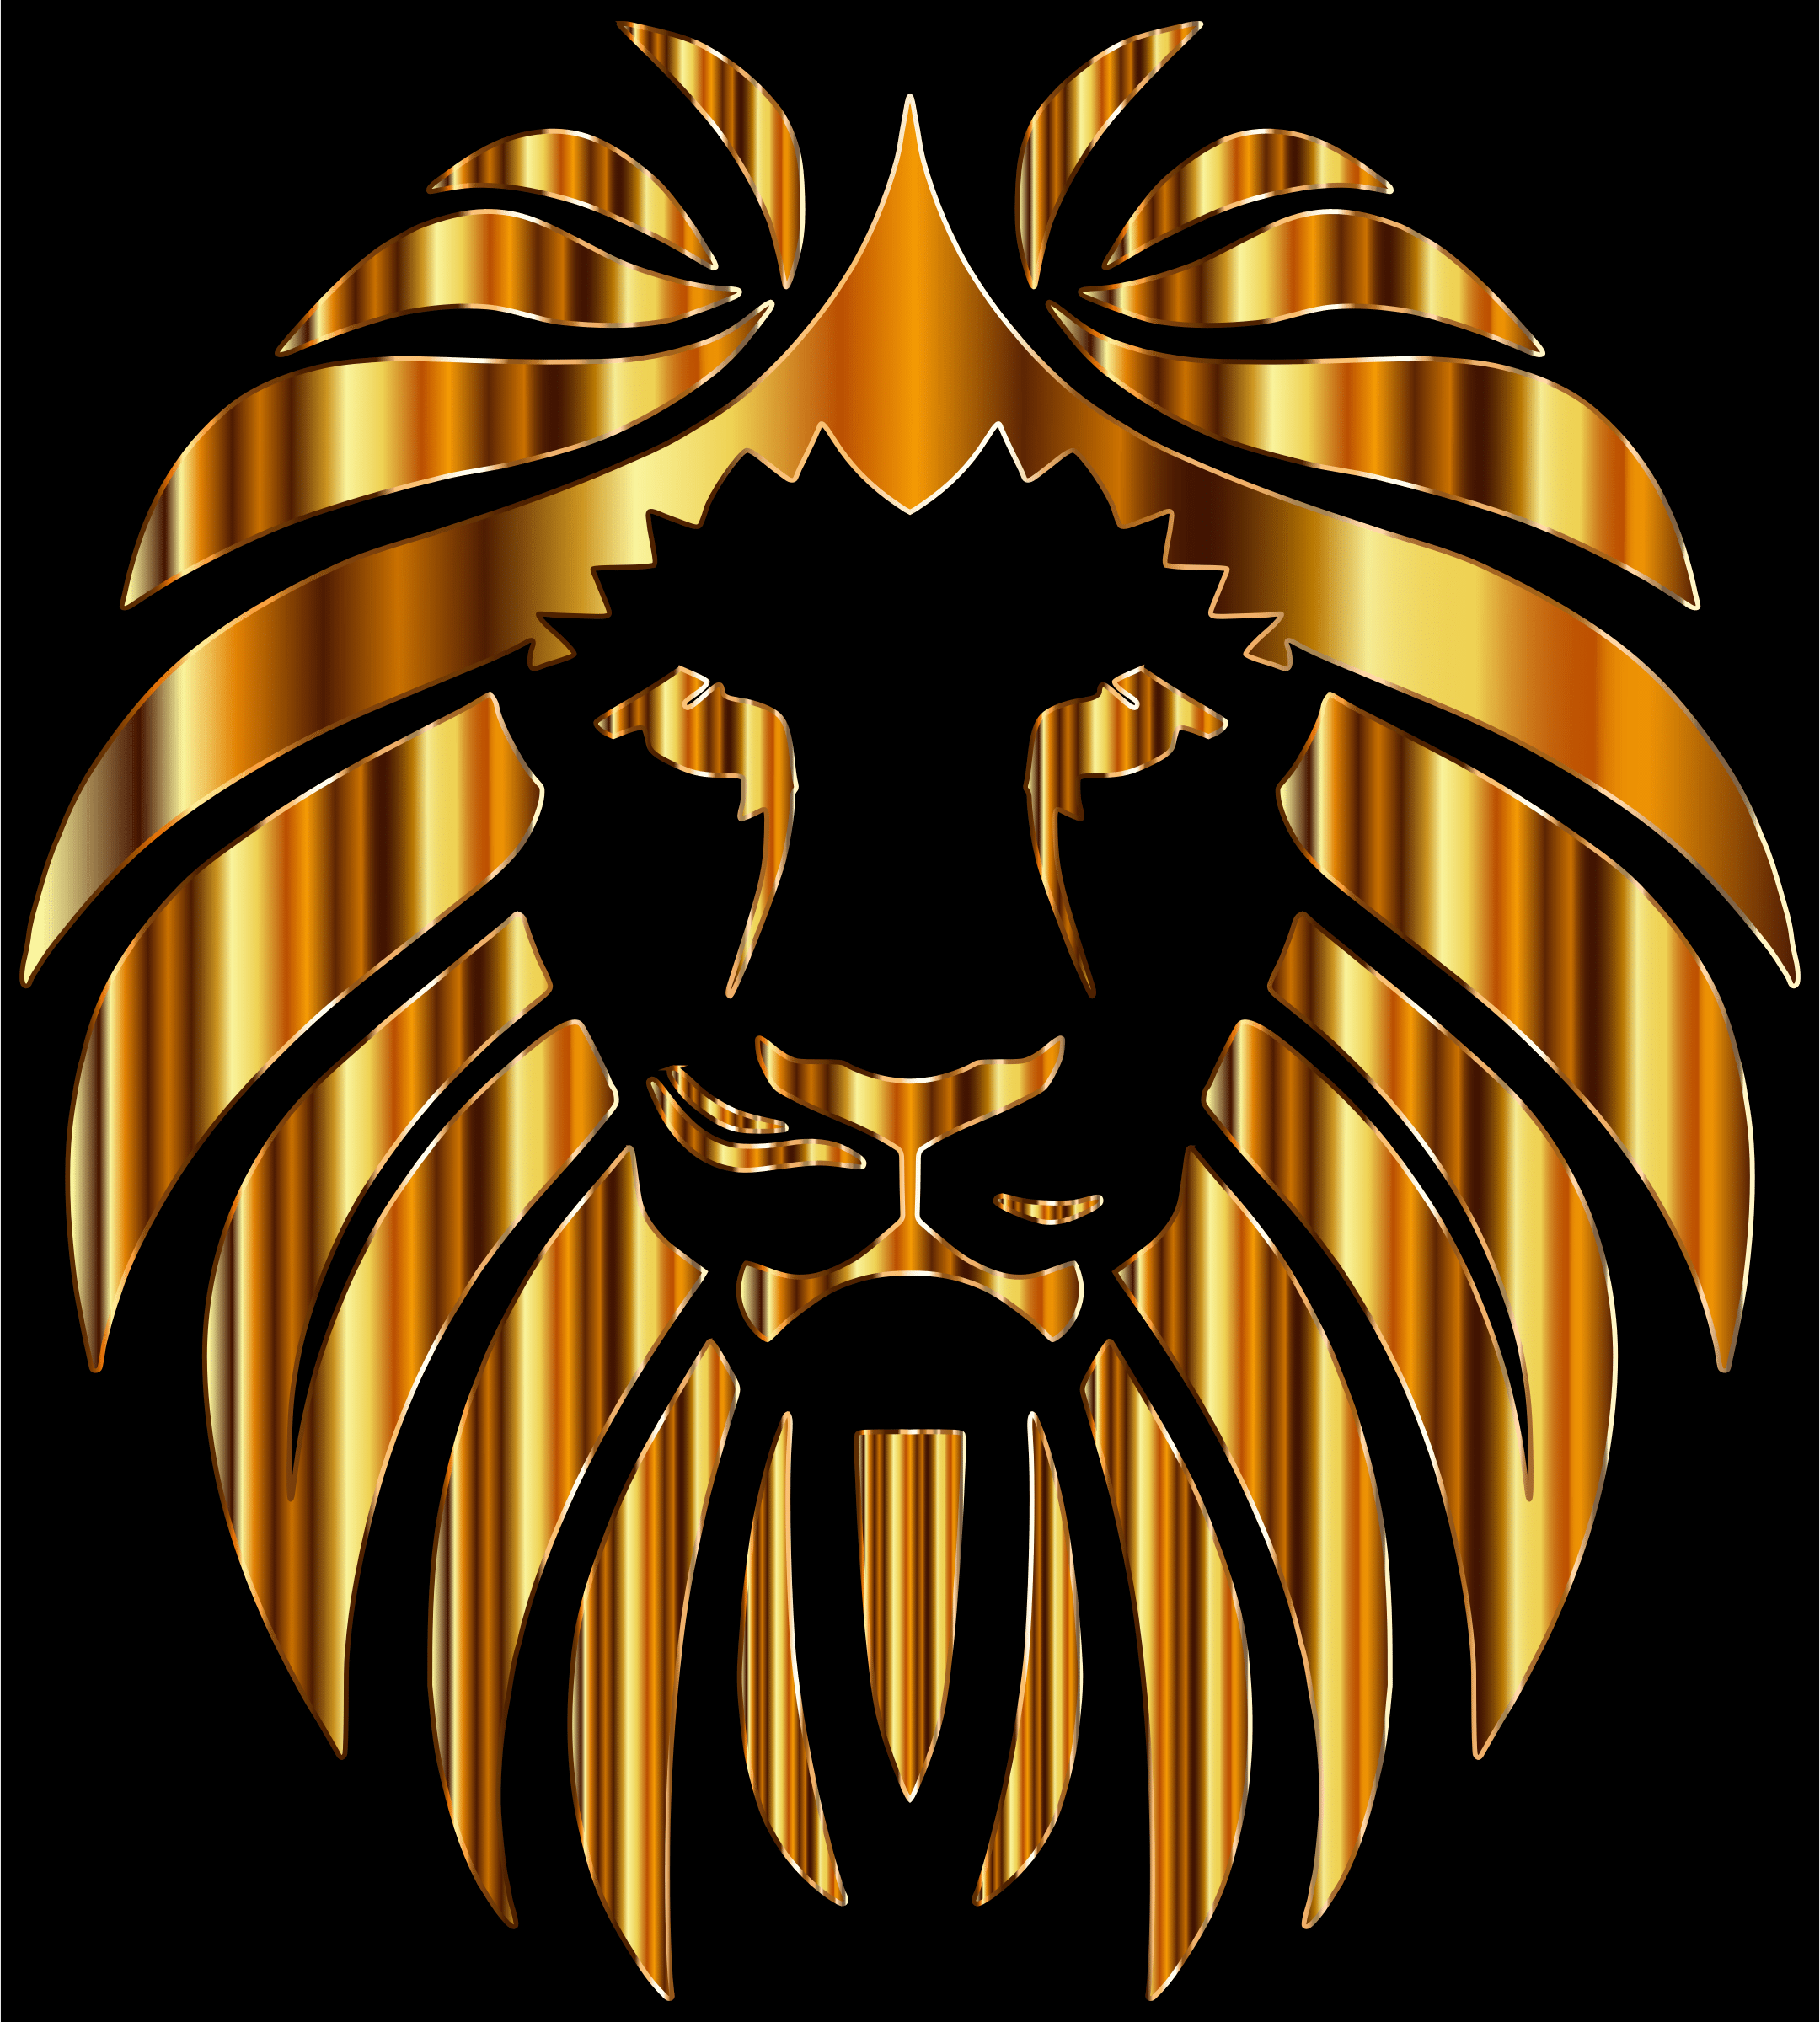 Gold Lion Wallpapers Top Free Gold Lion Backgrounds Wallpaperaccess ...